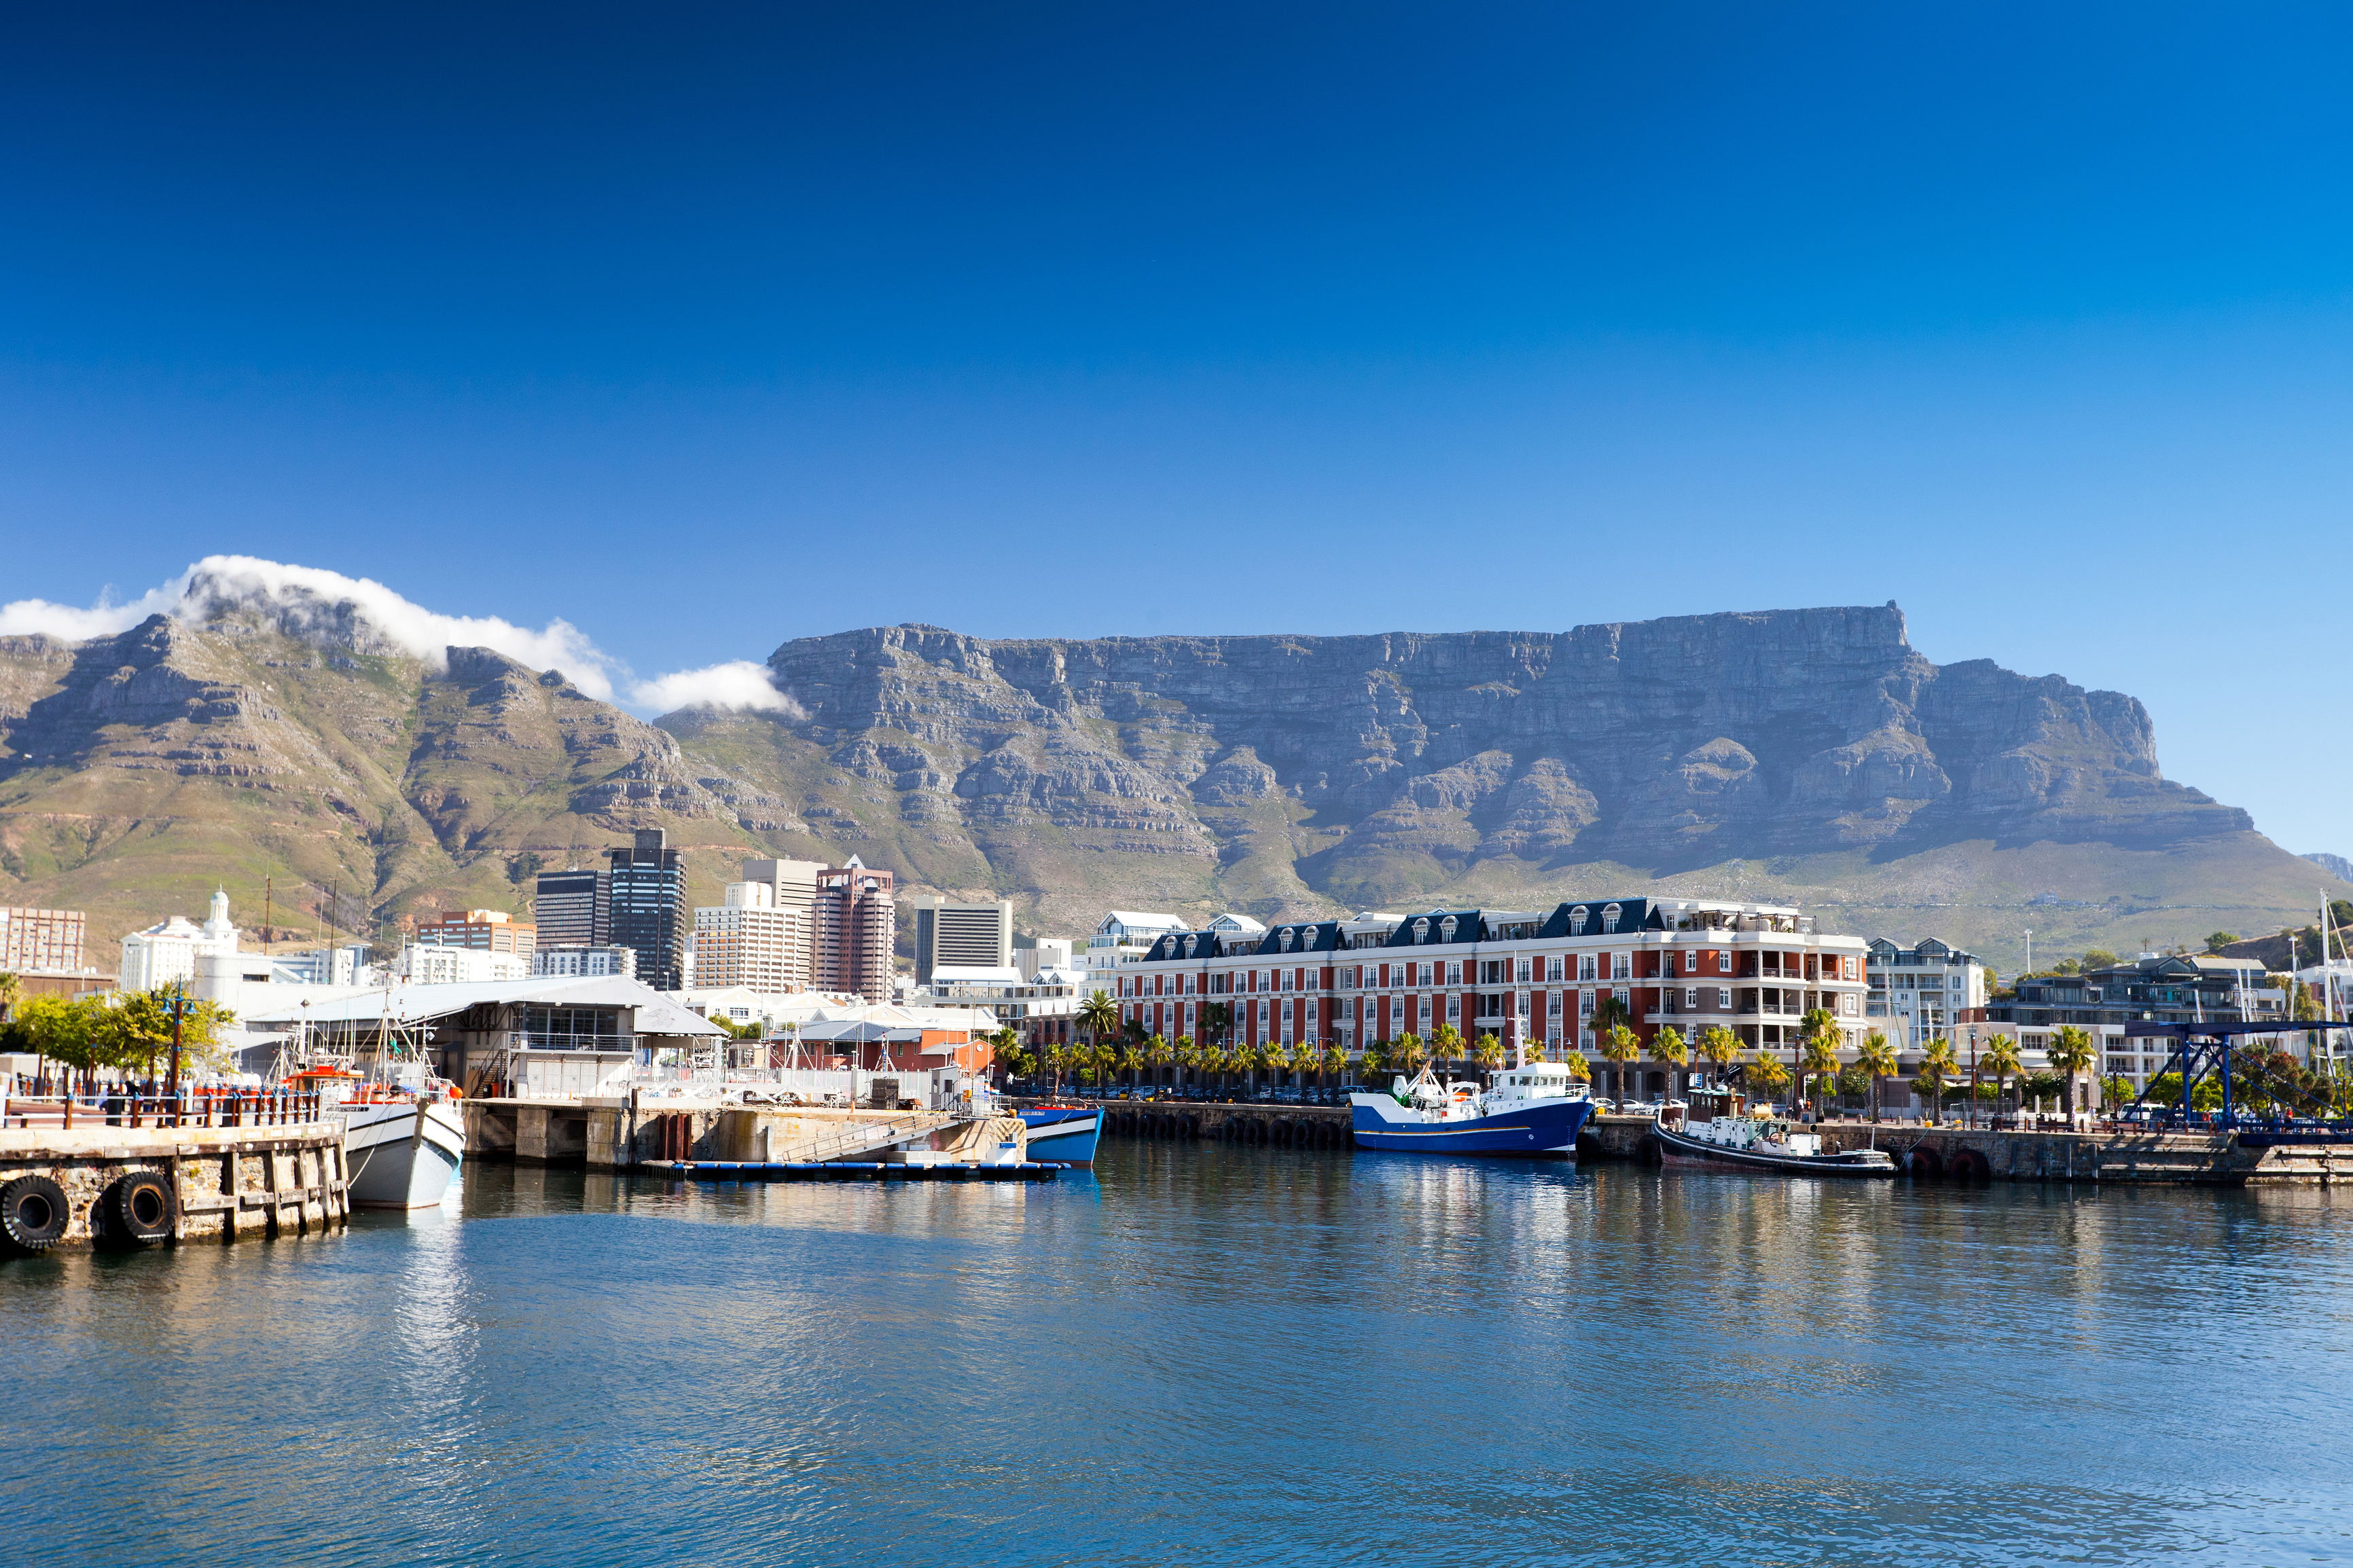 Round-trip flights to Cape Town in the $600s